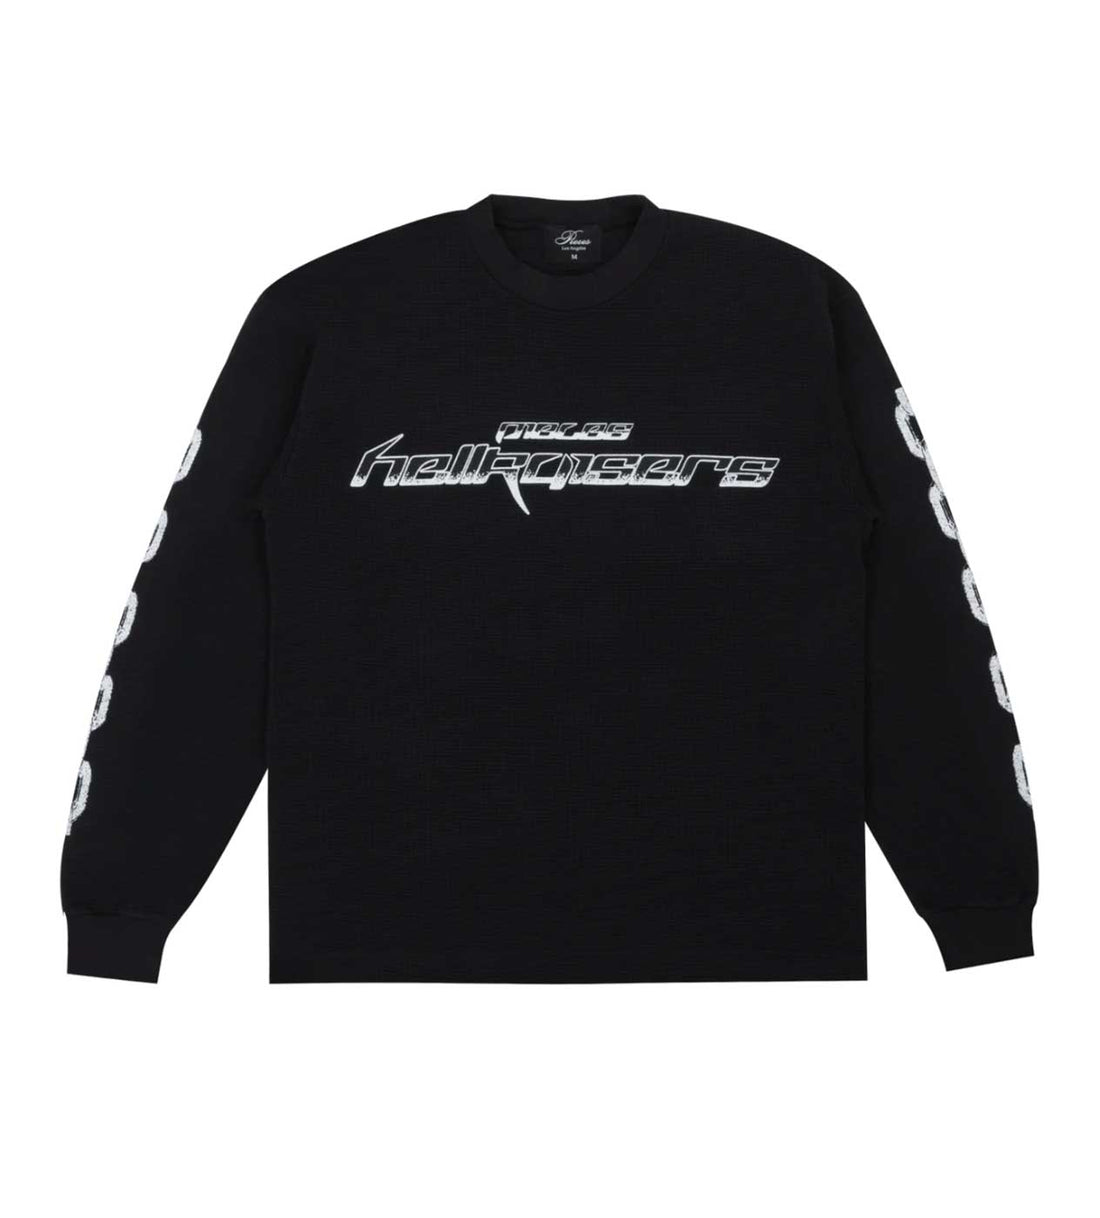 Pieces Hellraisers Thermal Long Sleeve Black Front